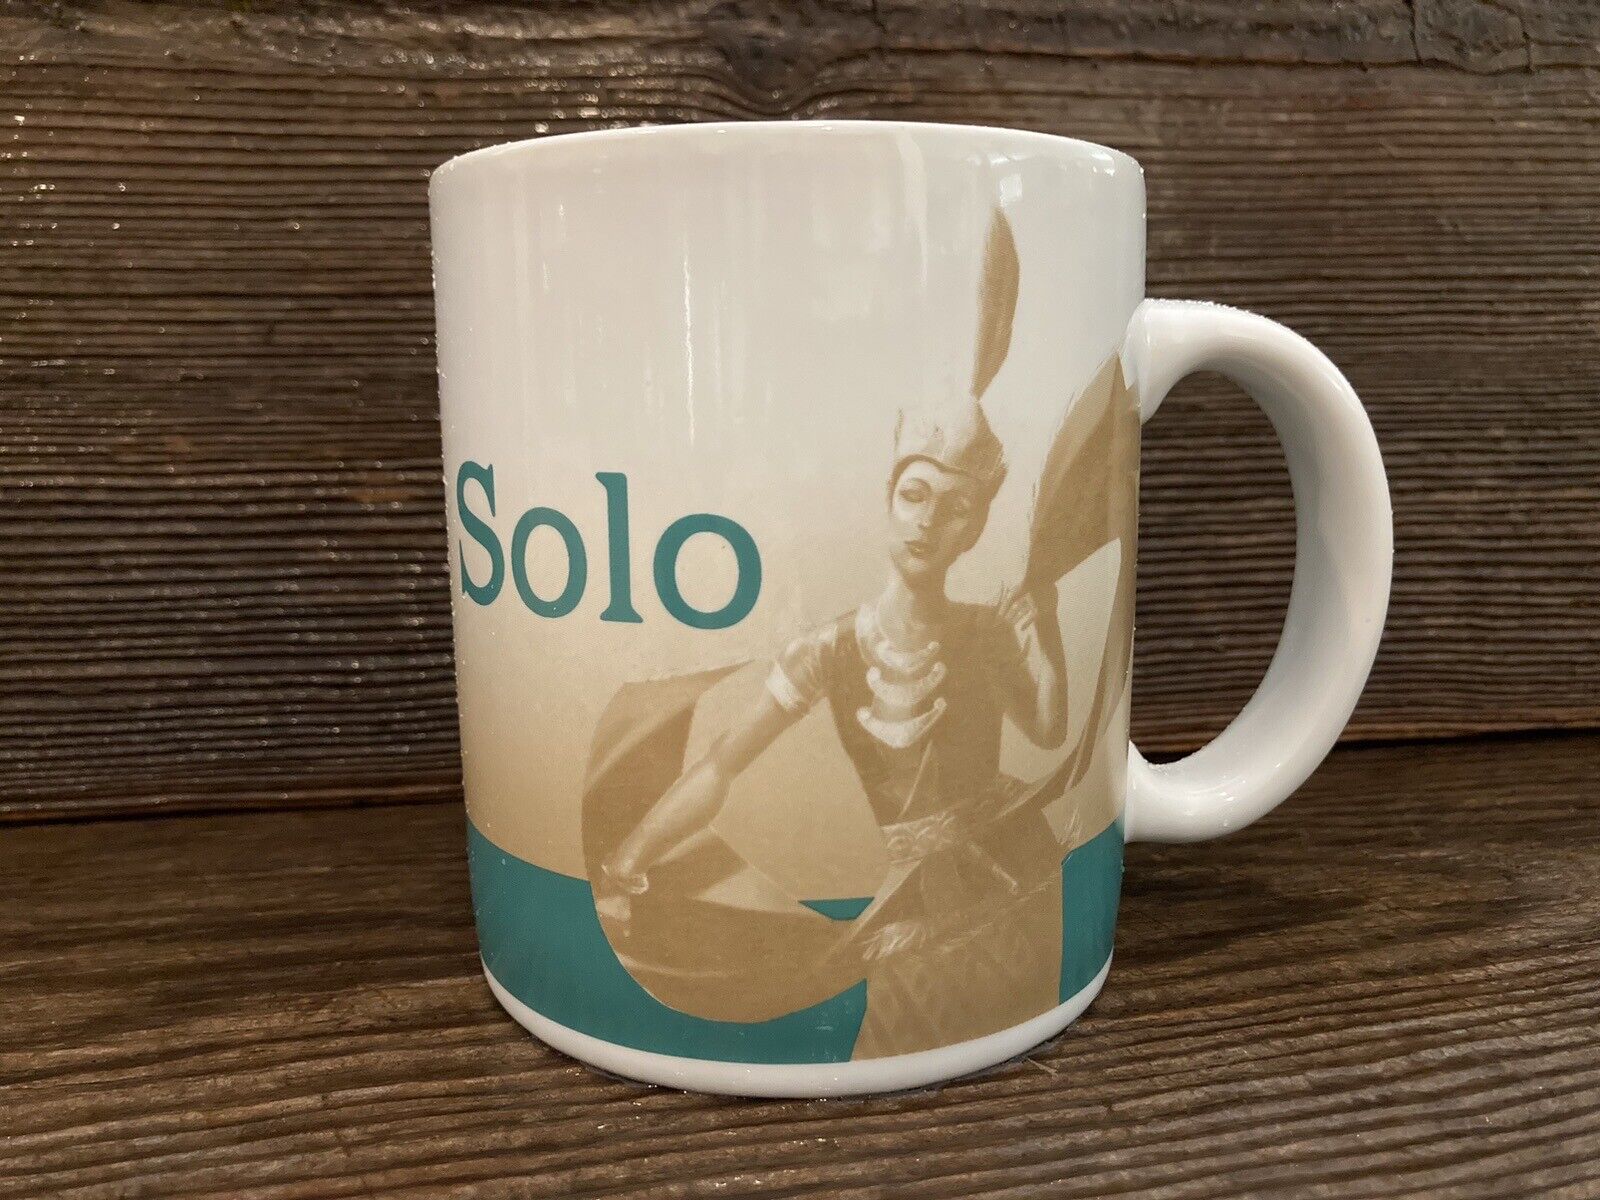 Starbucks 2012 SOLO INDONESIA Dancer Series Cup Mug w/ Blemishes